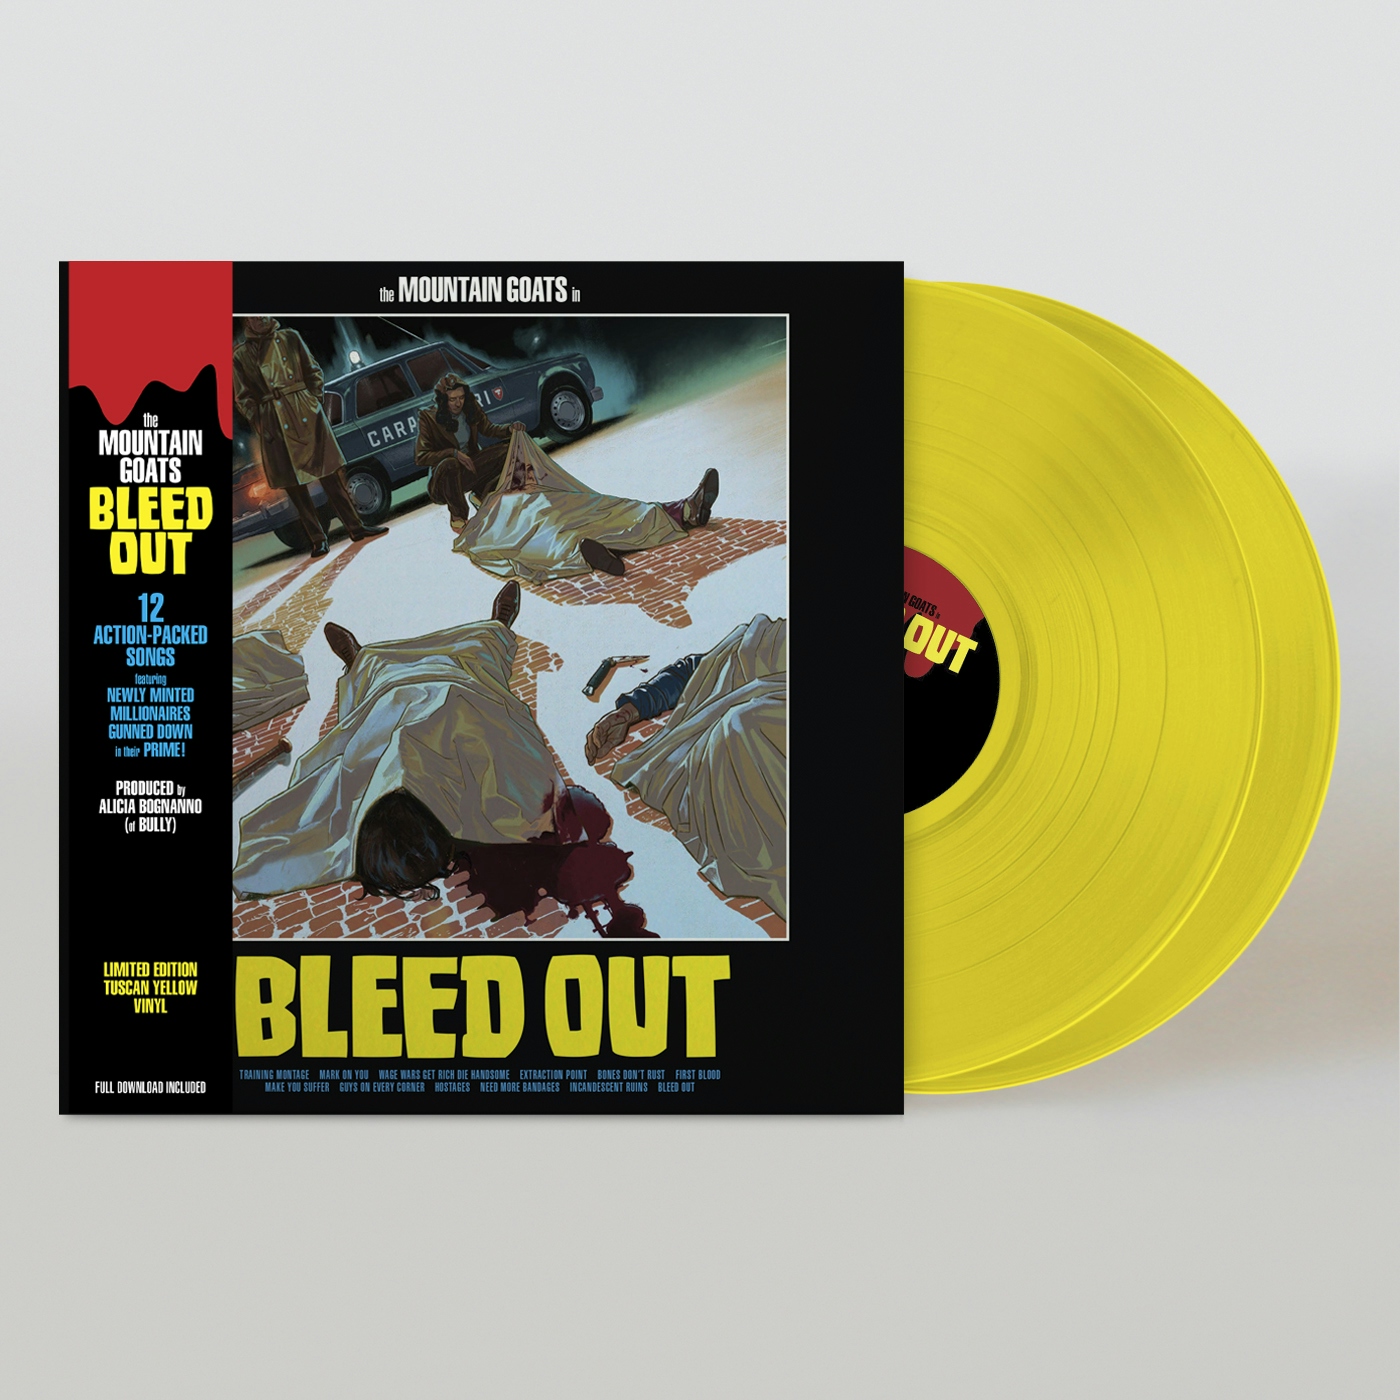 Album artwork for Bleed Out by The Mountain Goats